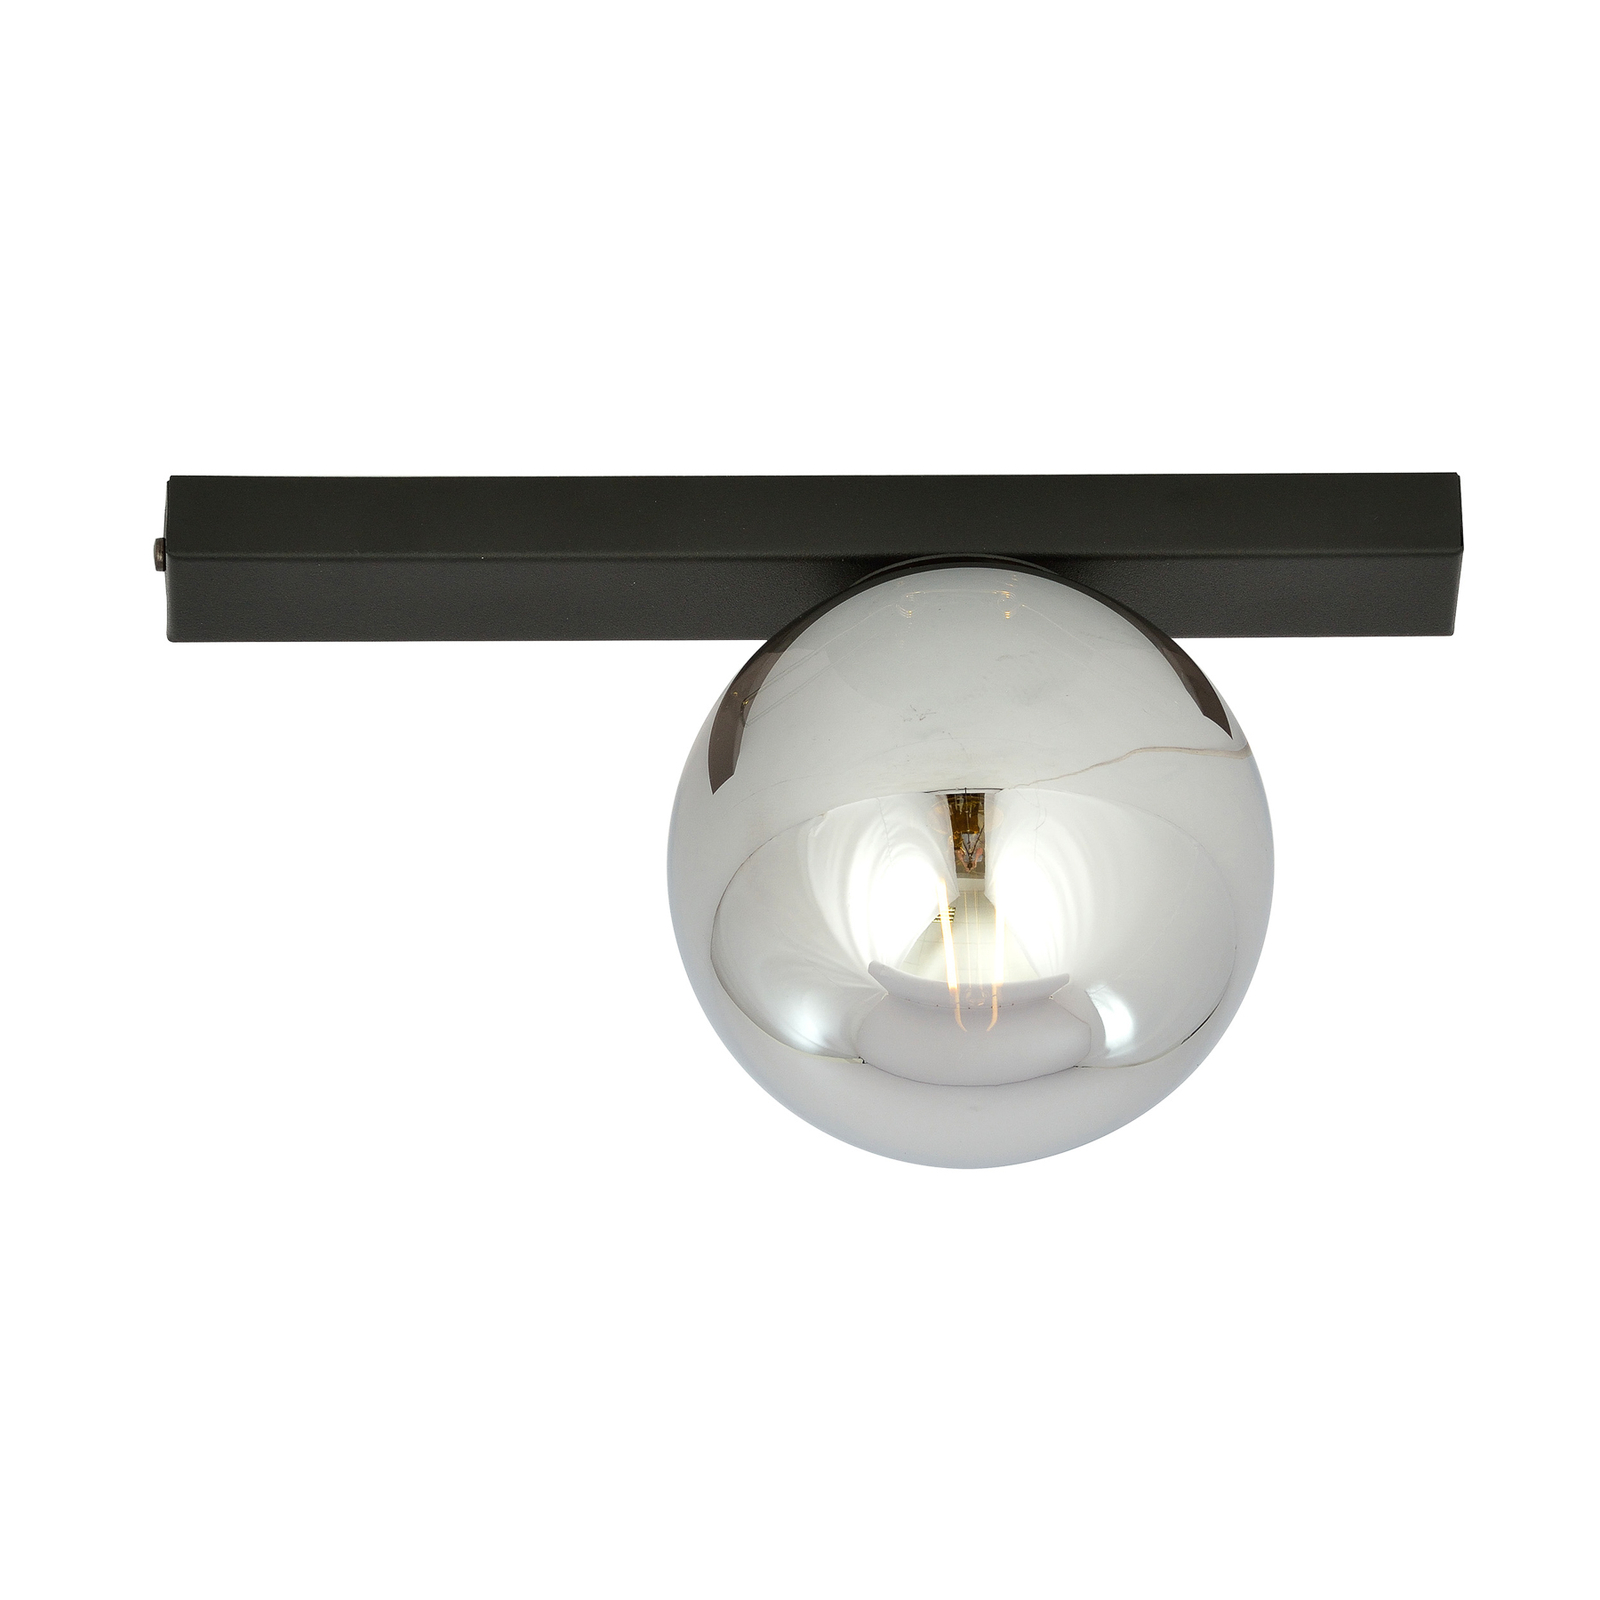 Fit ceiling lamp, black/graphite, one-bulb